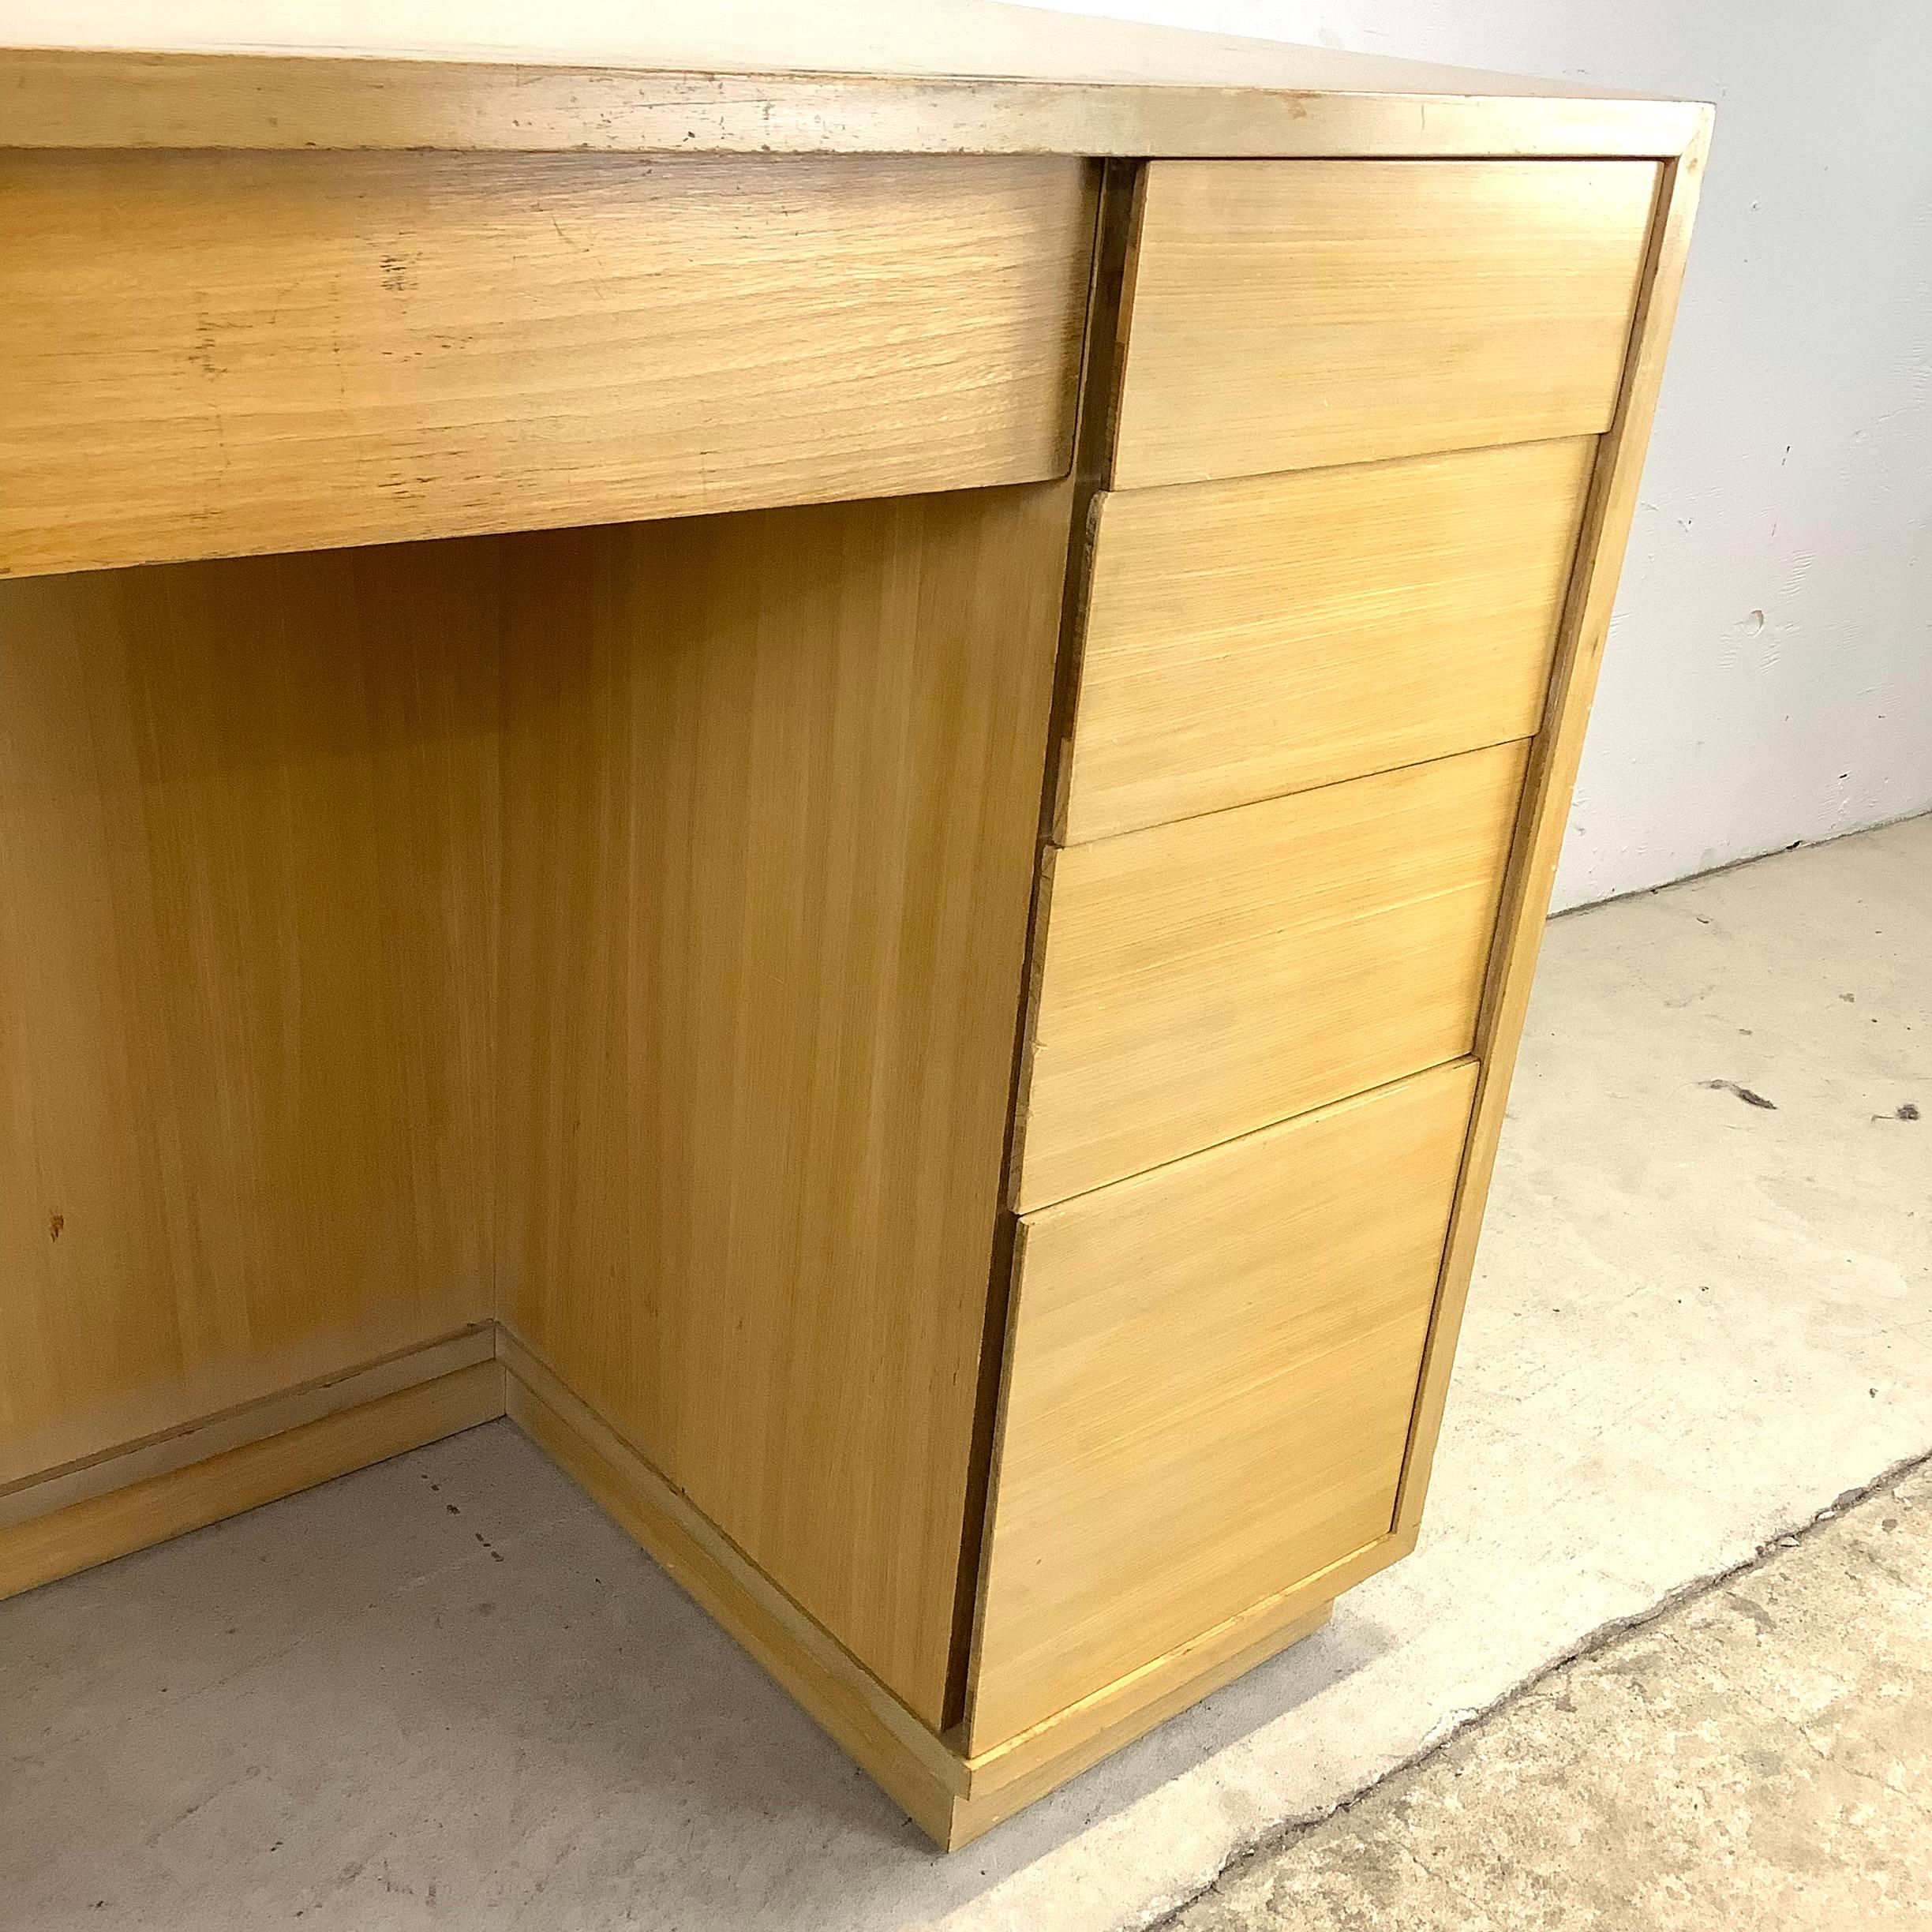 Midcentury Desk by Edward Wormley for Drexel 1